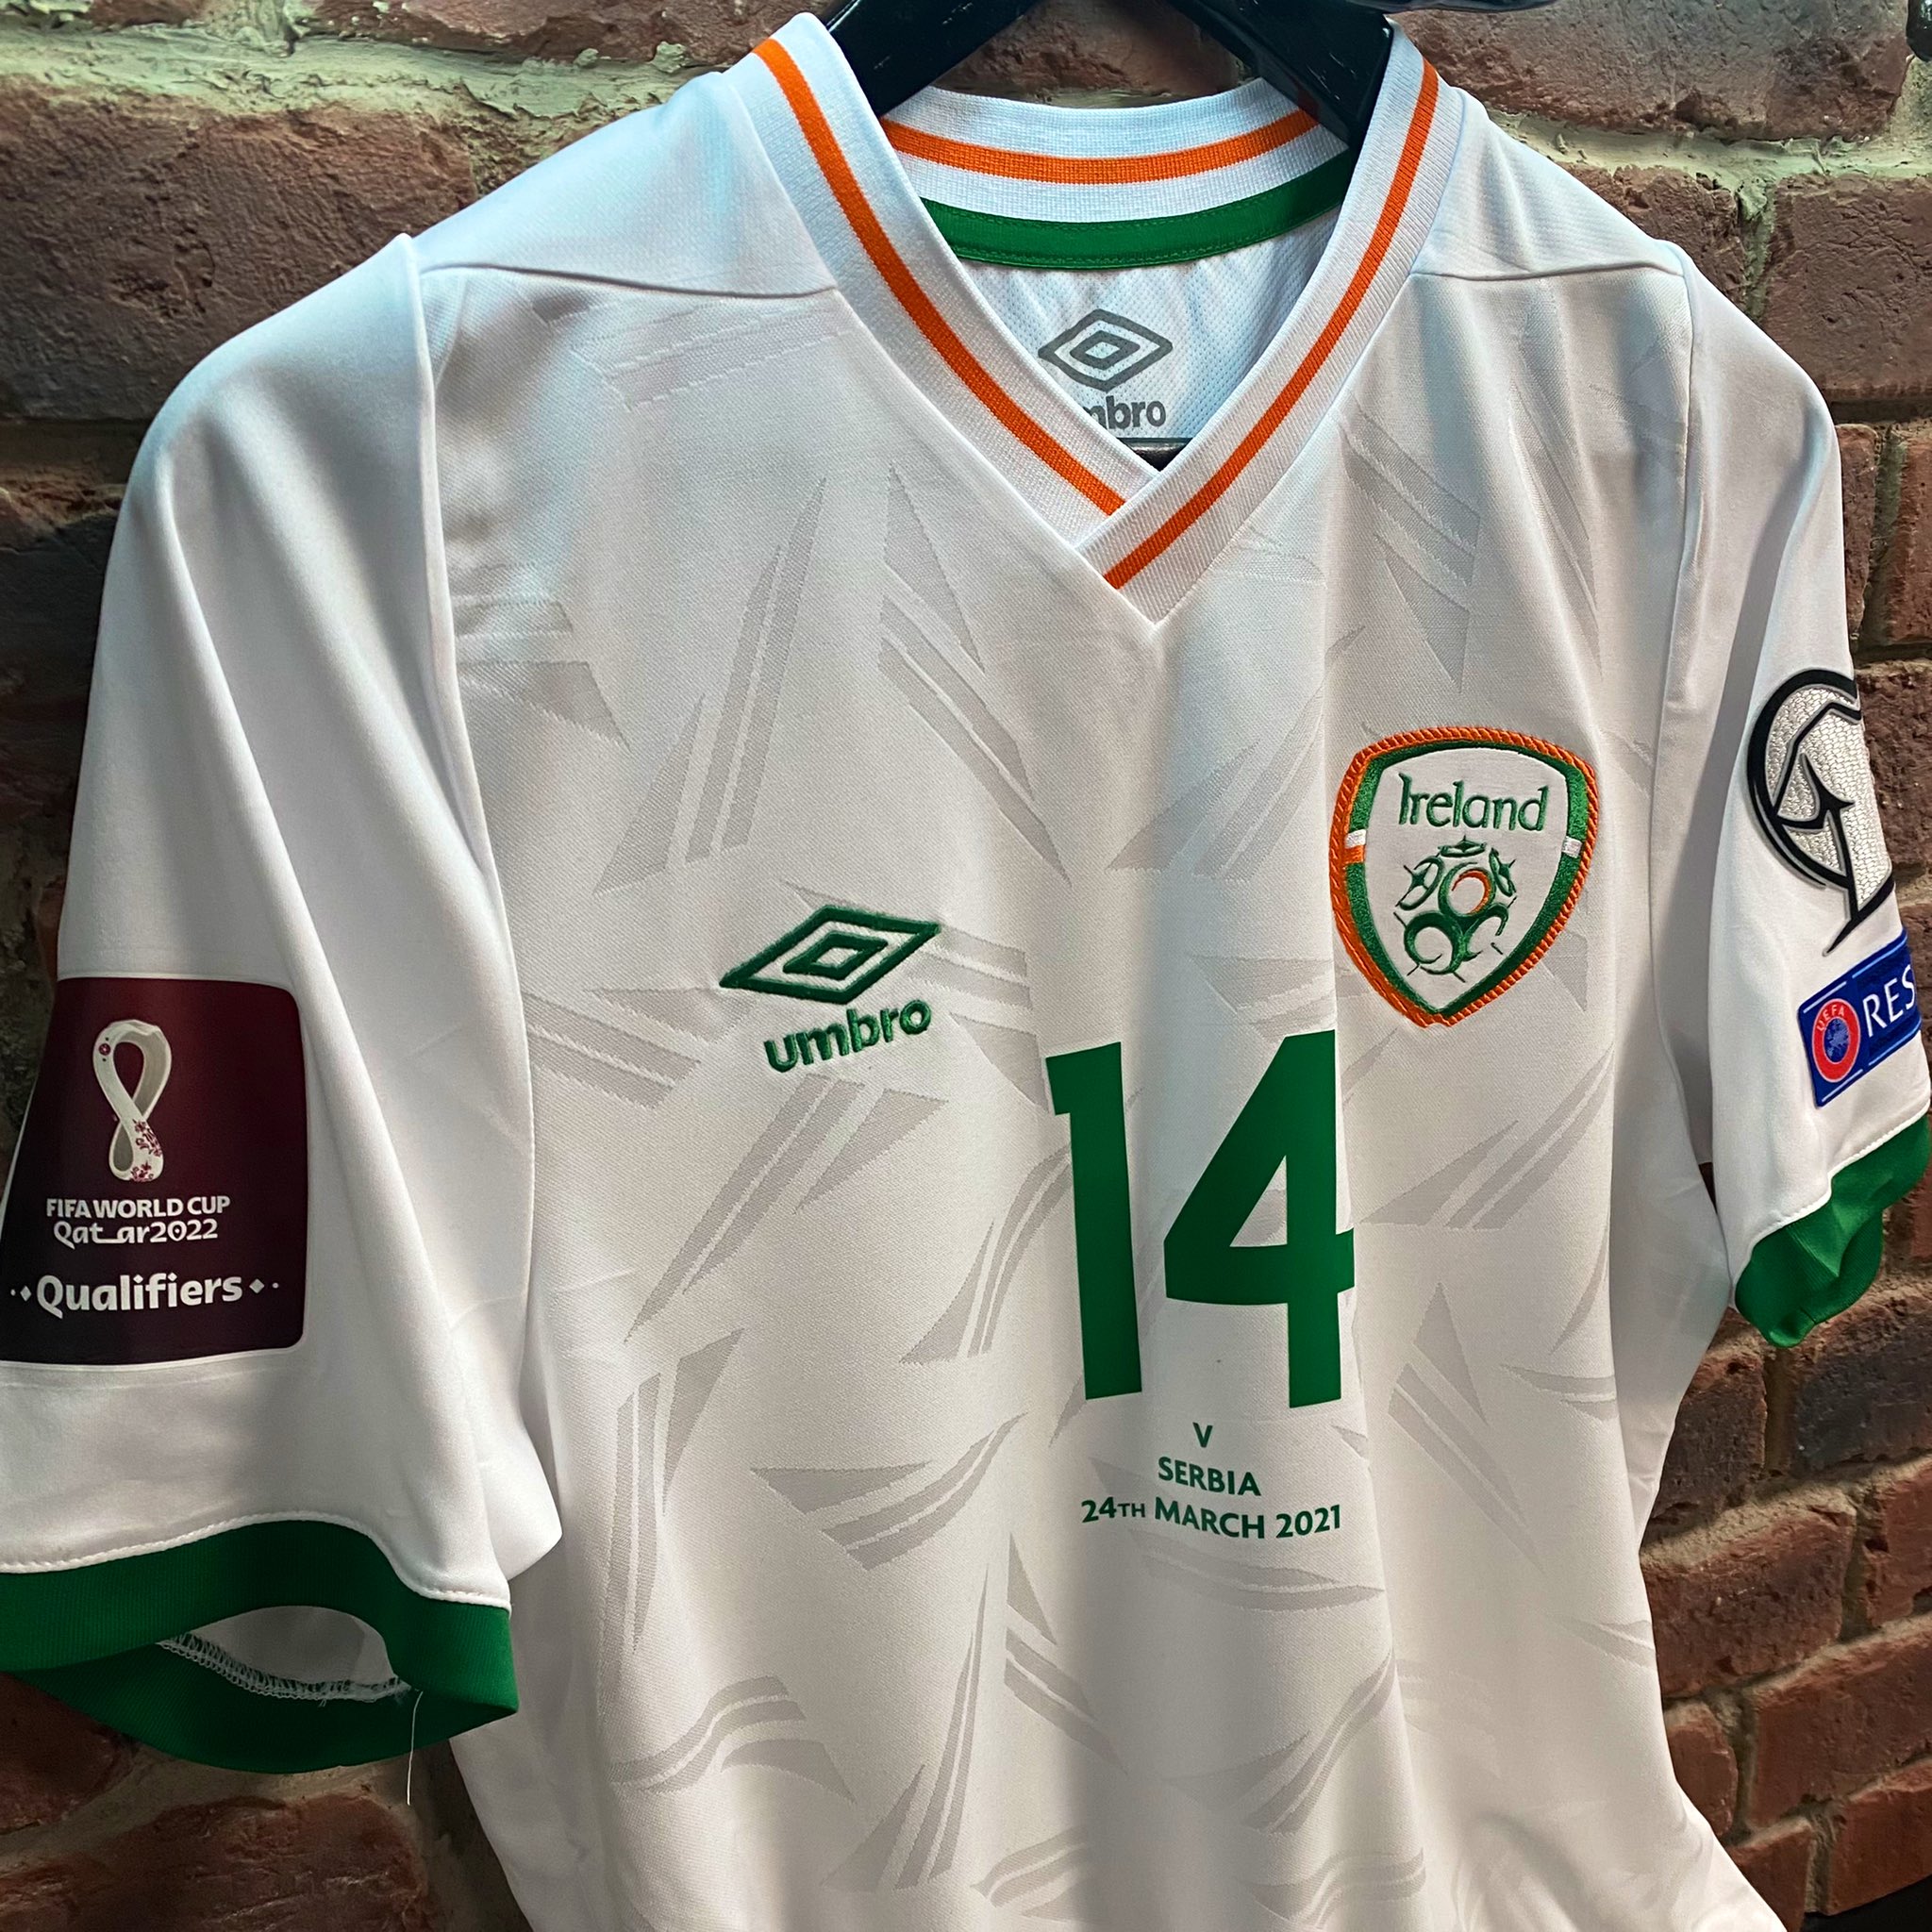 Umbro Ireland on X: "☘️ WIN ☘️ The WCQs begin tomorrow evening as  @FAIreland take on Serbia. To celebrate we have this match shirt to give  away to one lucky person 🇷🇸